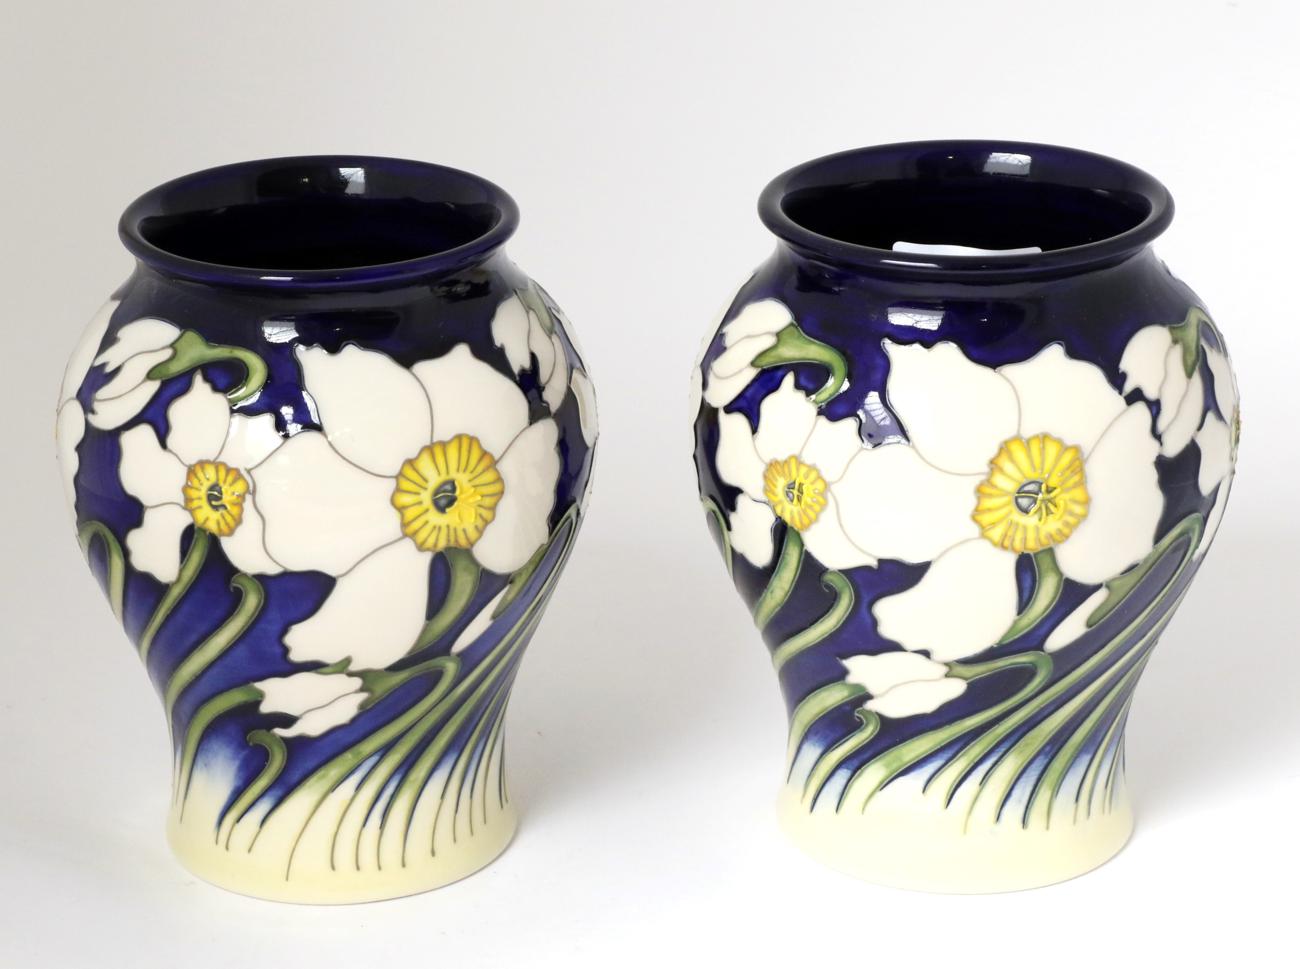 Lot 22 - A pair of Moorcroft pottery vases by Kerry Goodwin, 44/75 and 68/75, with painted and impressed...